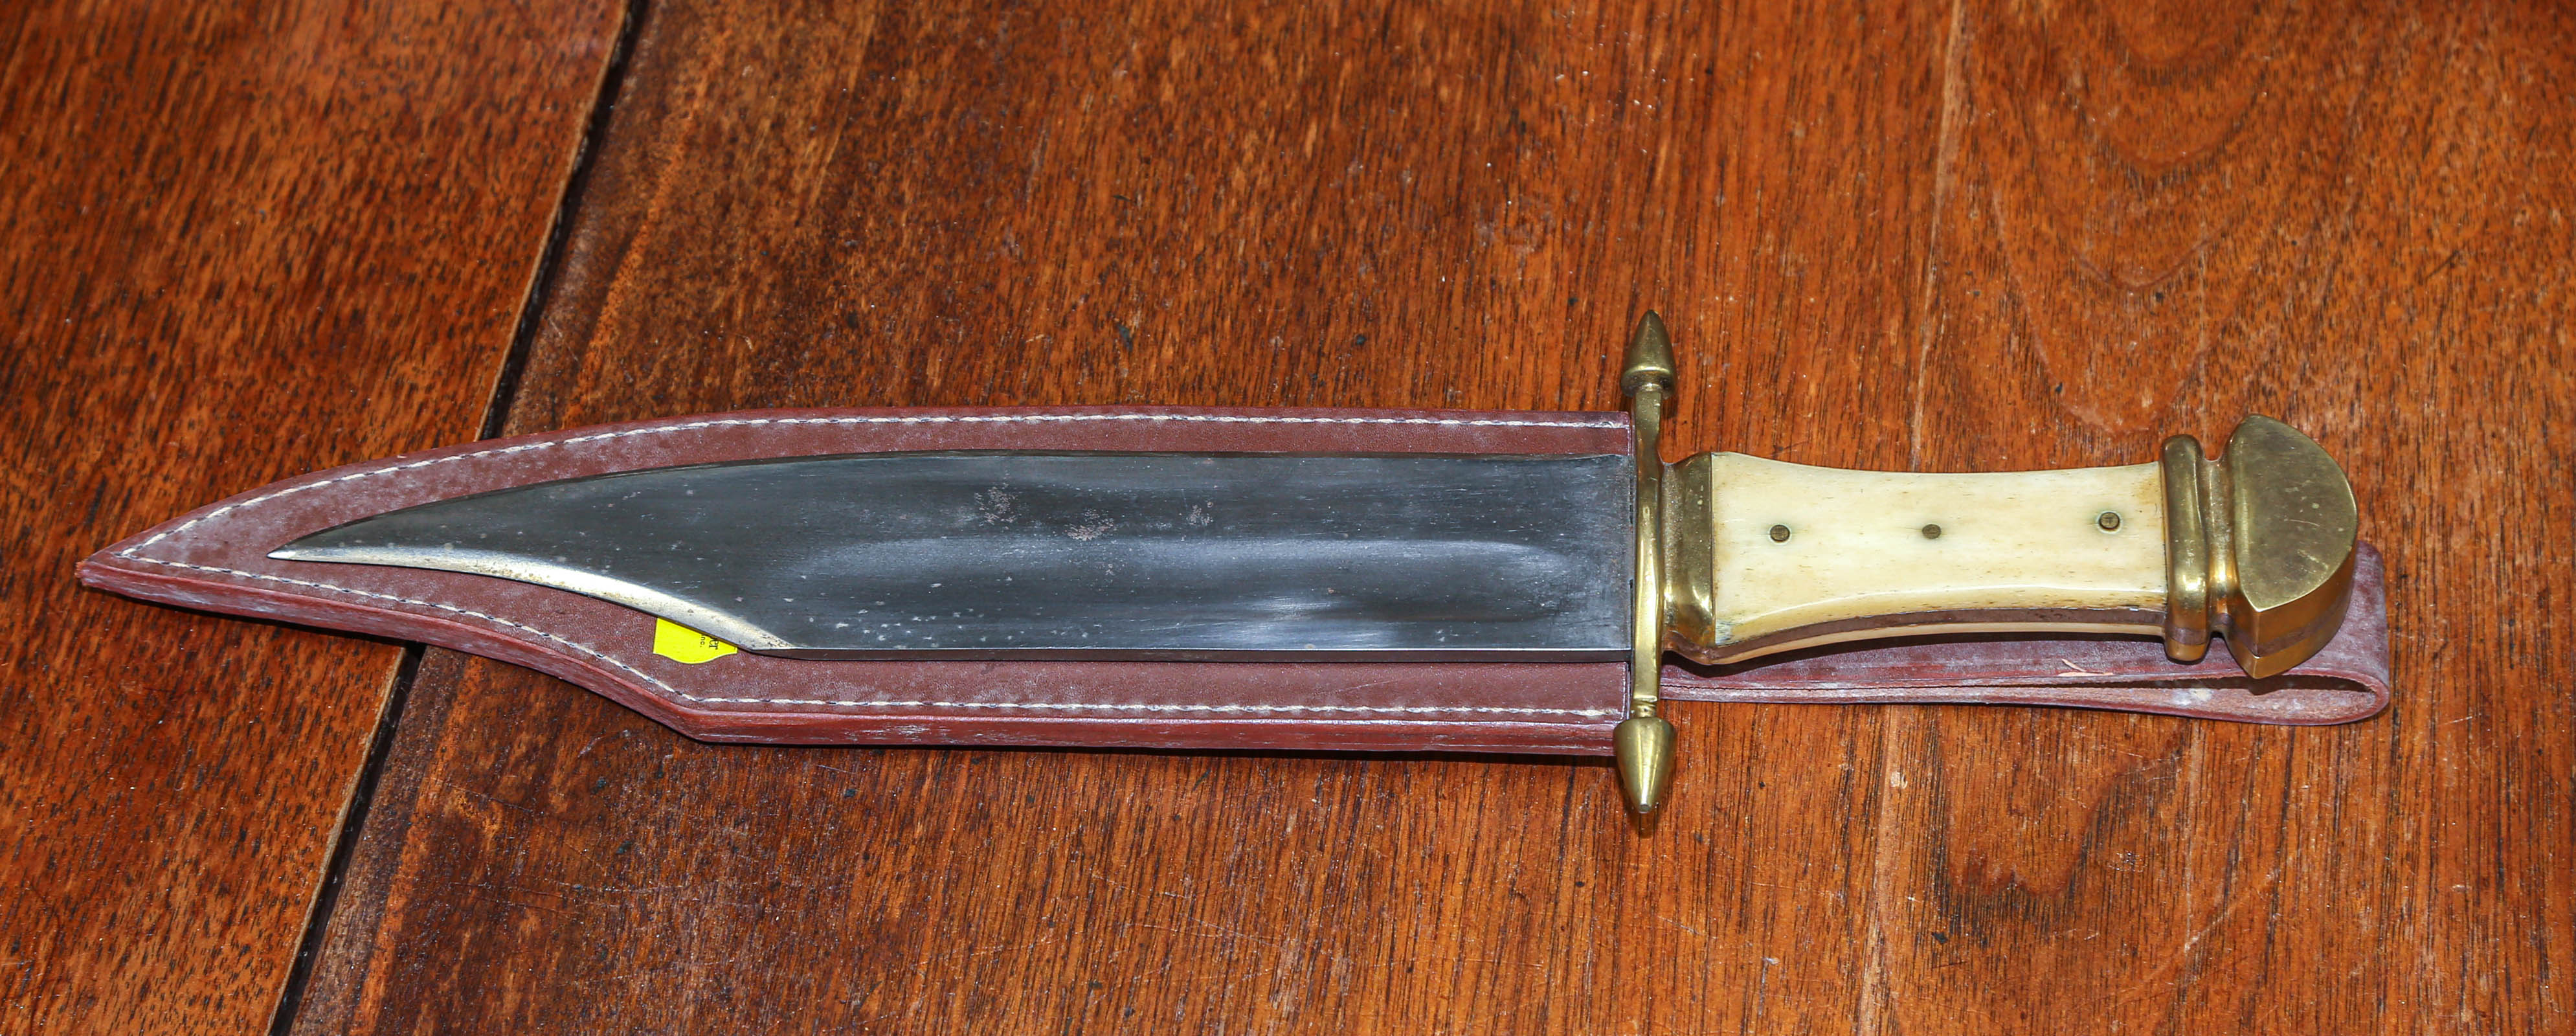 HAND CRAFTED BOWIE KNIFE 20th century  2ea448